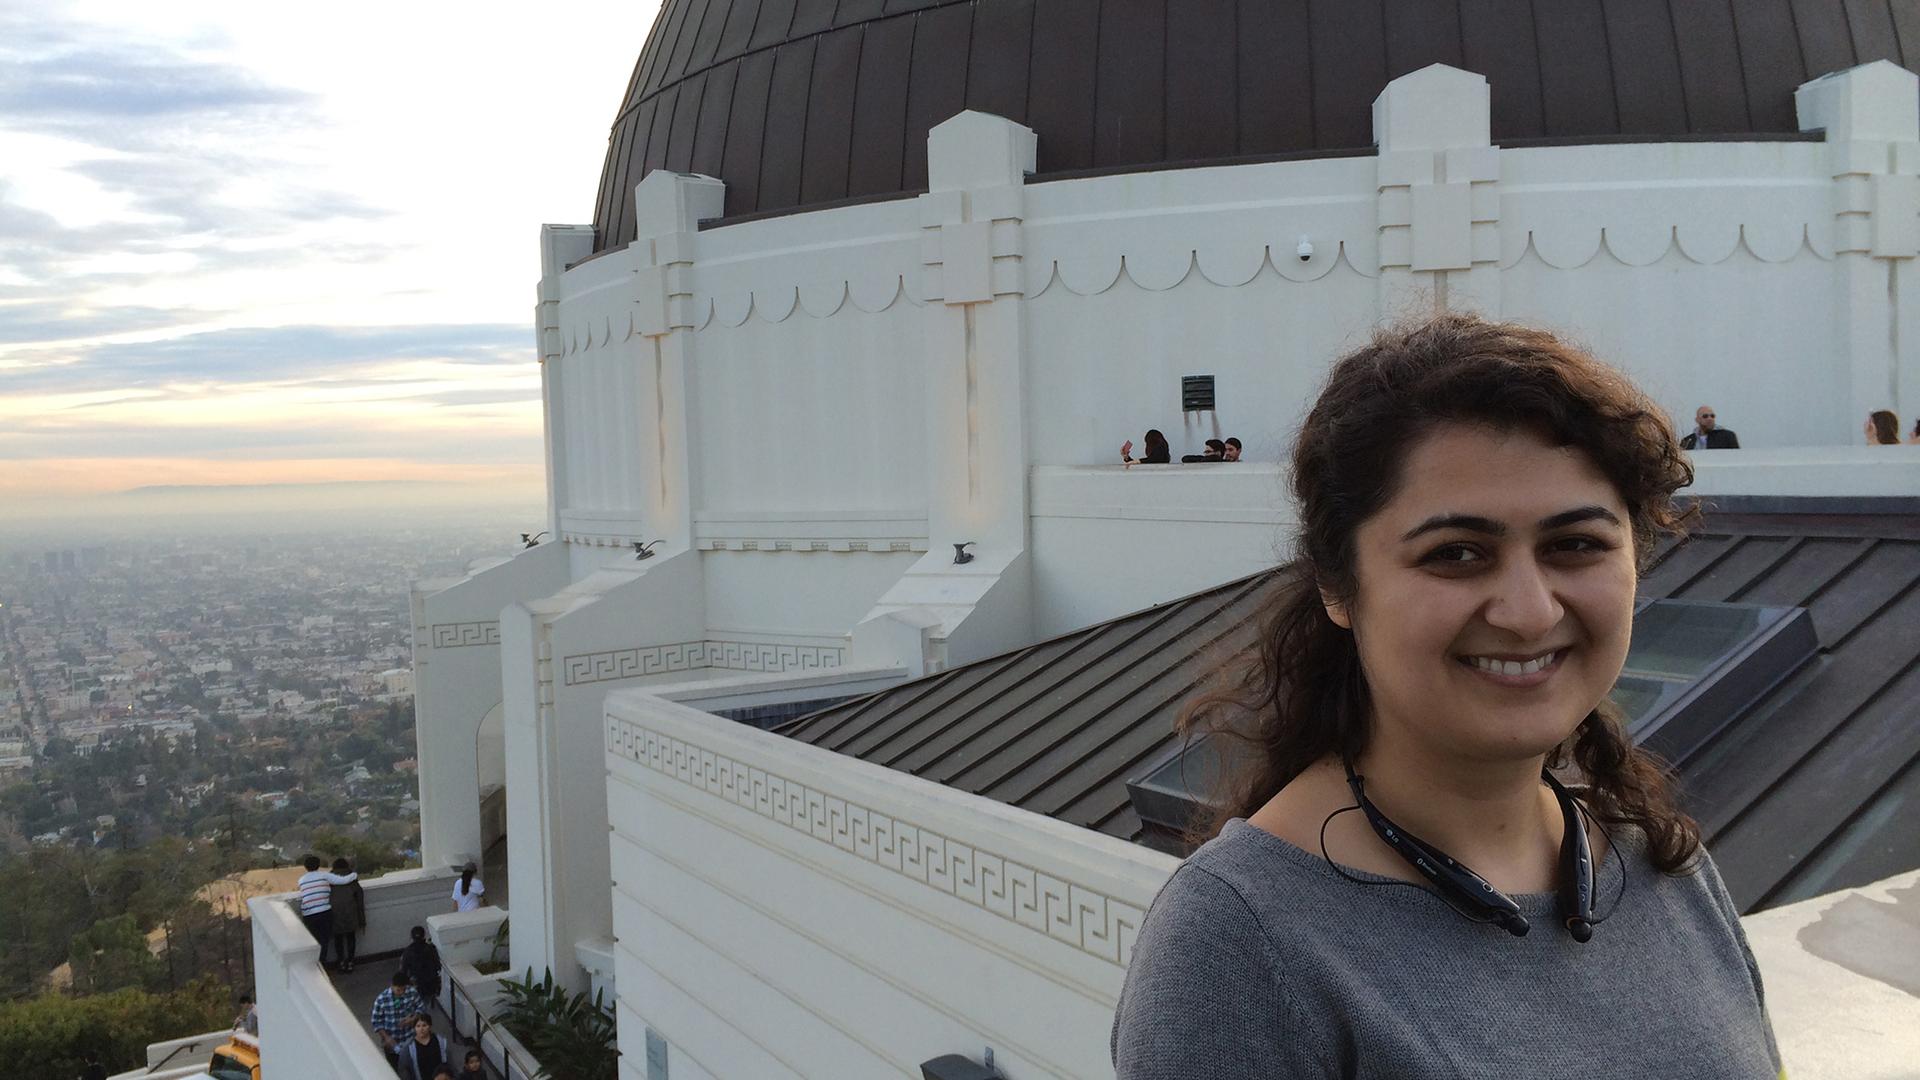 When Sona Hosseini went on a class trip to the planetarium, she fell in love with the stars.